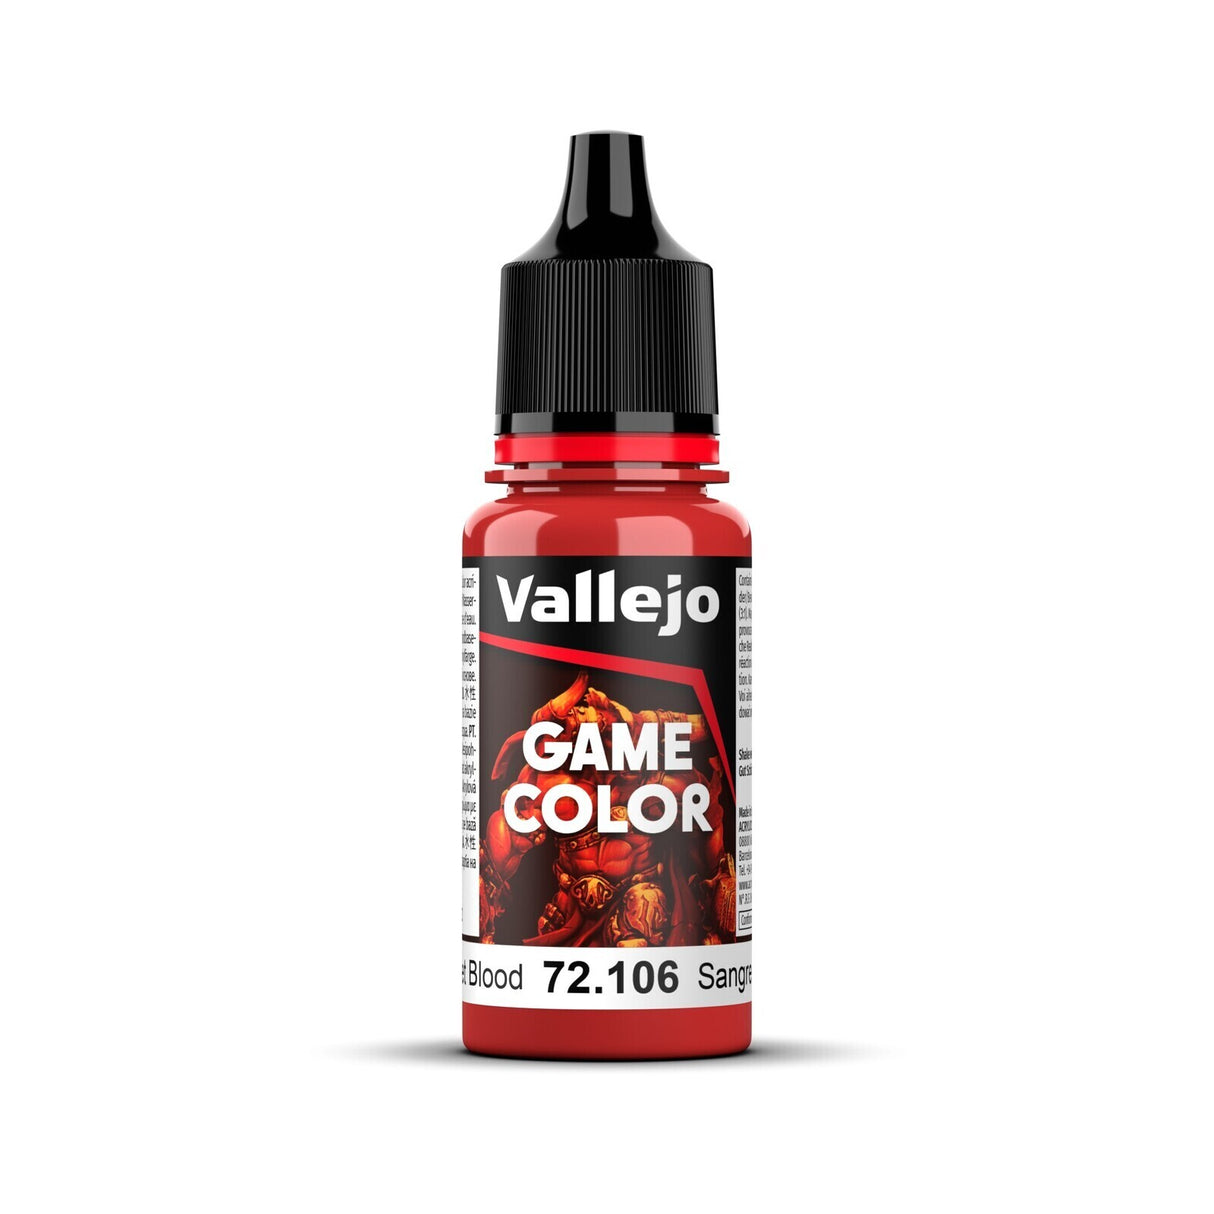 Vallejo Game Color Scarlet Blood 18ml Acrylic Paint - Hobbytech Toys